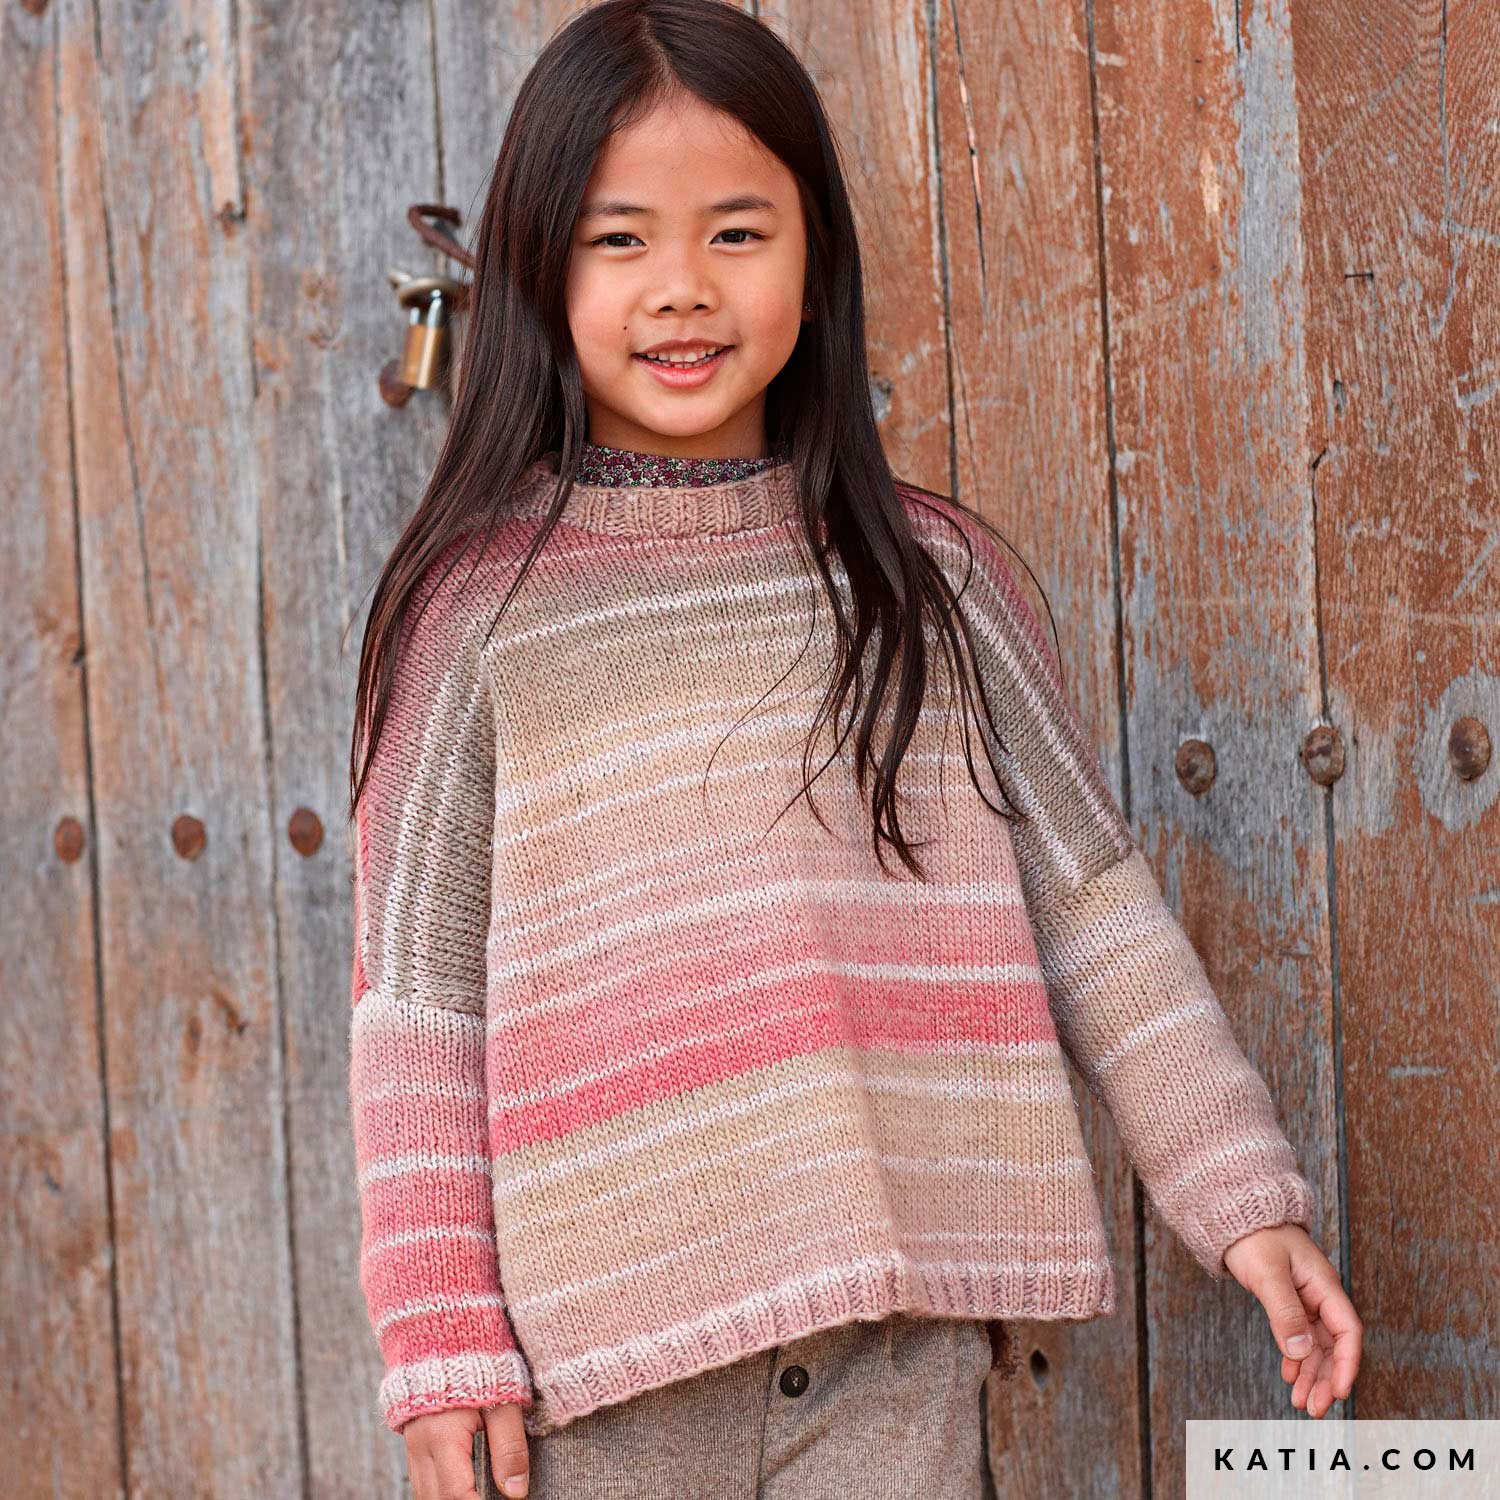 Tricot girly : un pull pour petite fille sage - SuperMadame